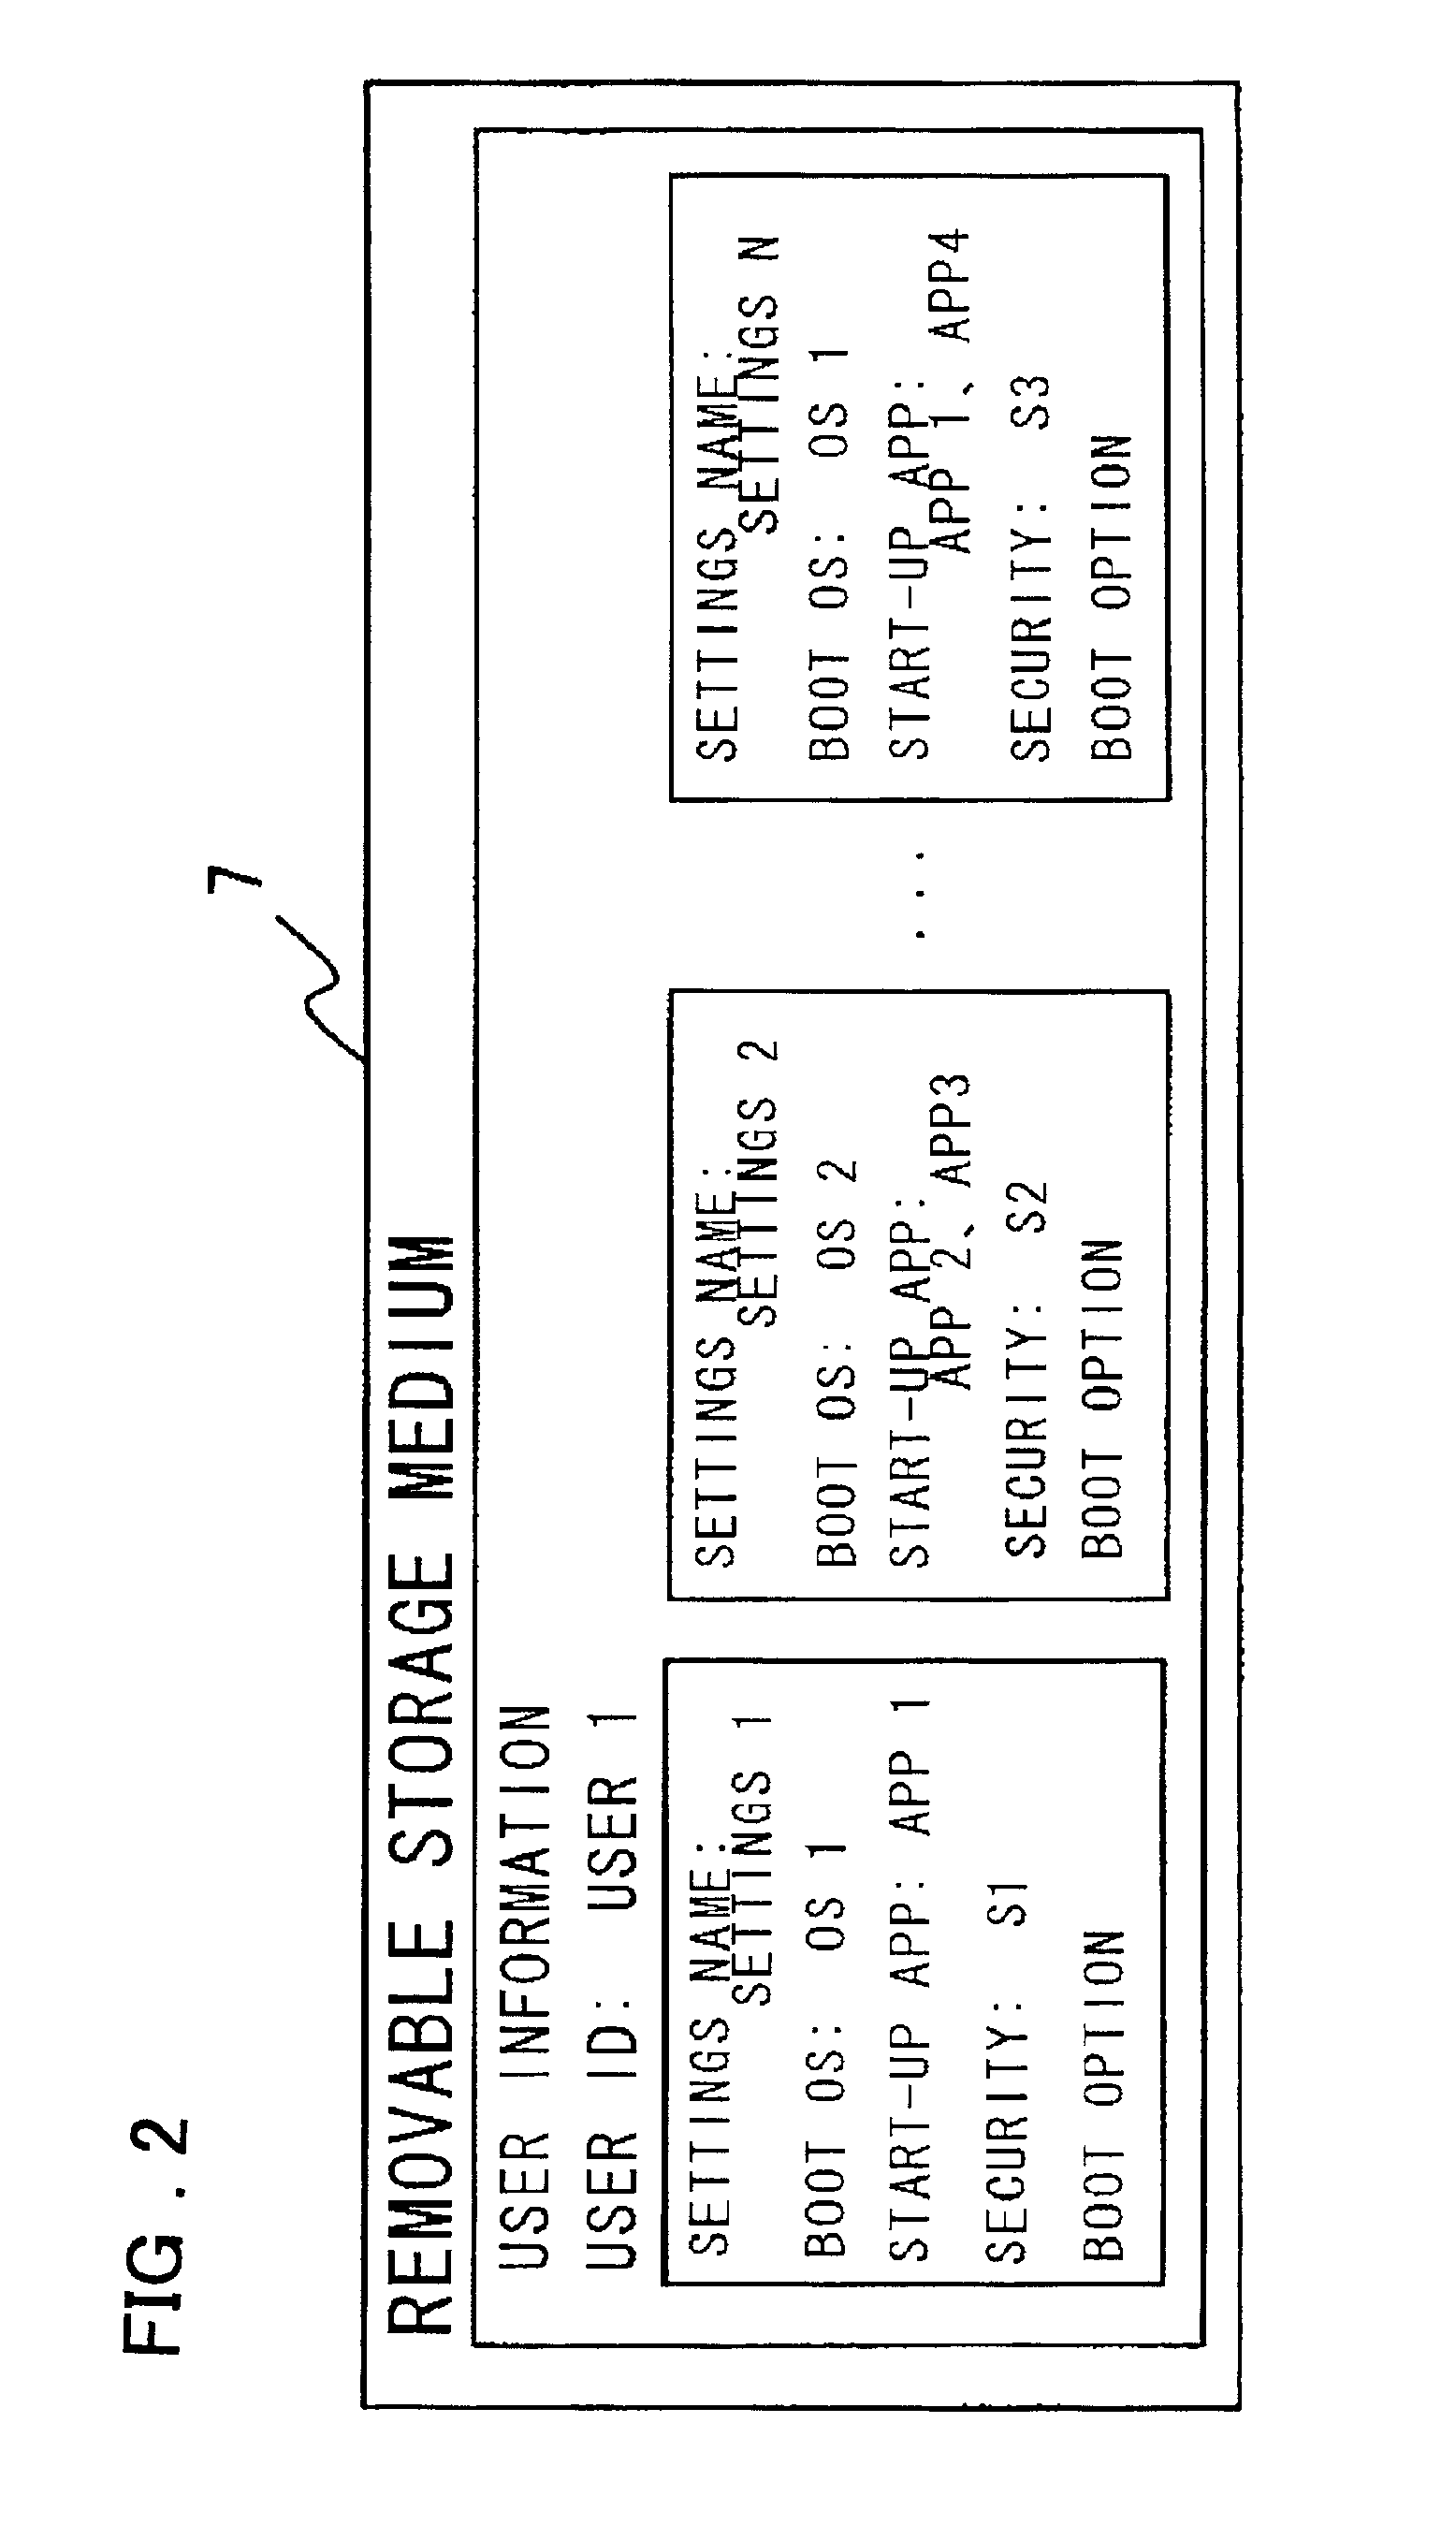 User-authentication-type network operating system booting method and system utilizing BIOS preboot environment